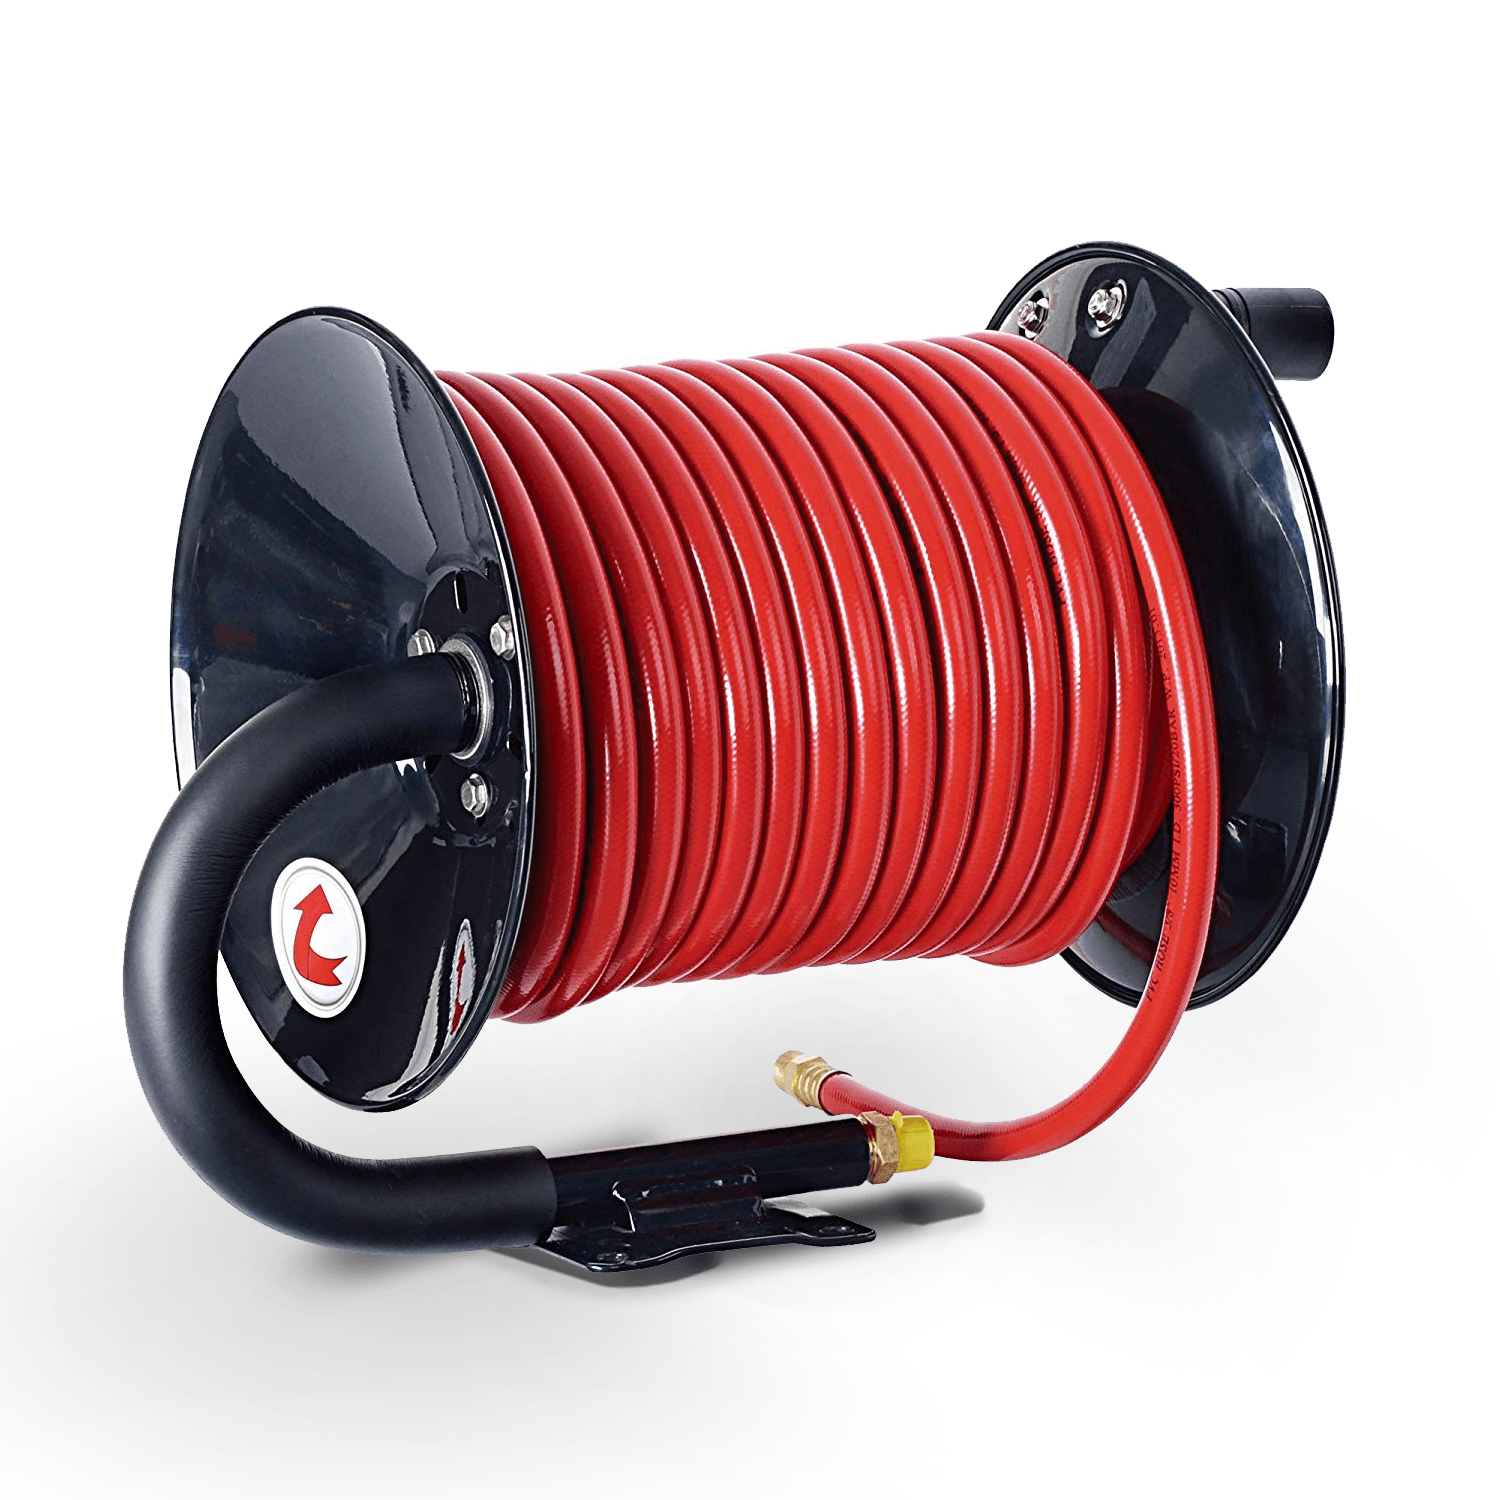 100' Hand Manual Air Hose Reel with Lead Hose - Fits 3/8 x 100ft Air Hoses